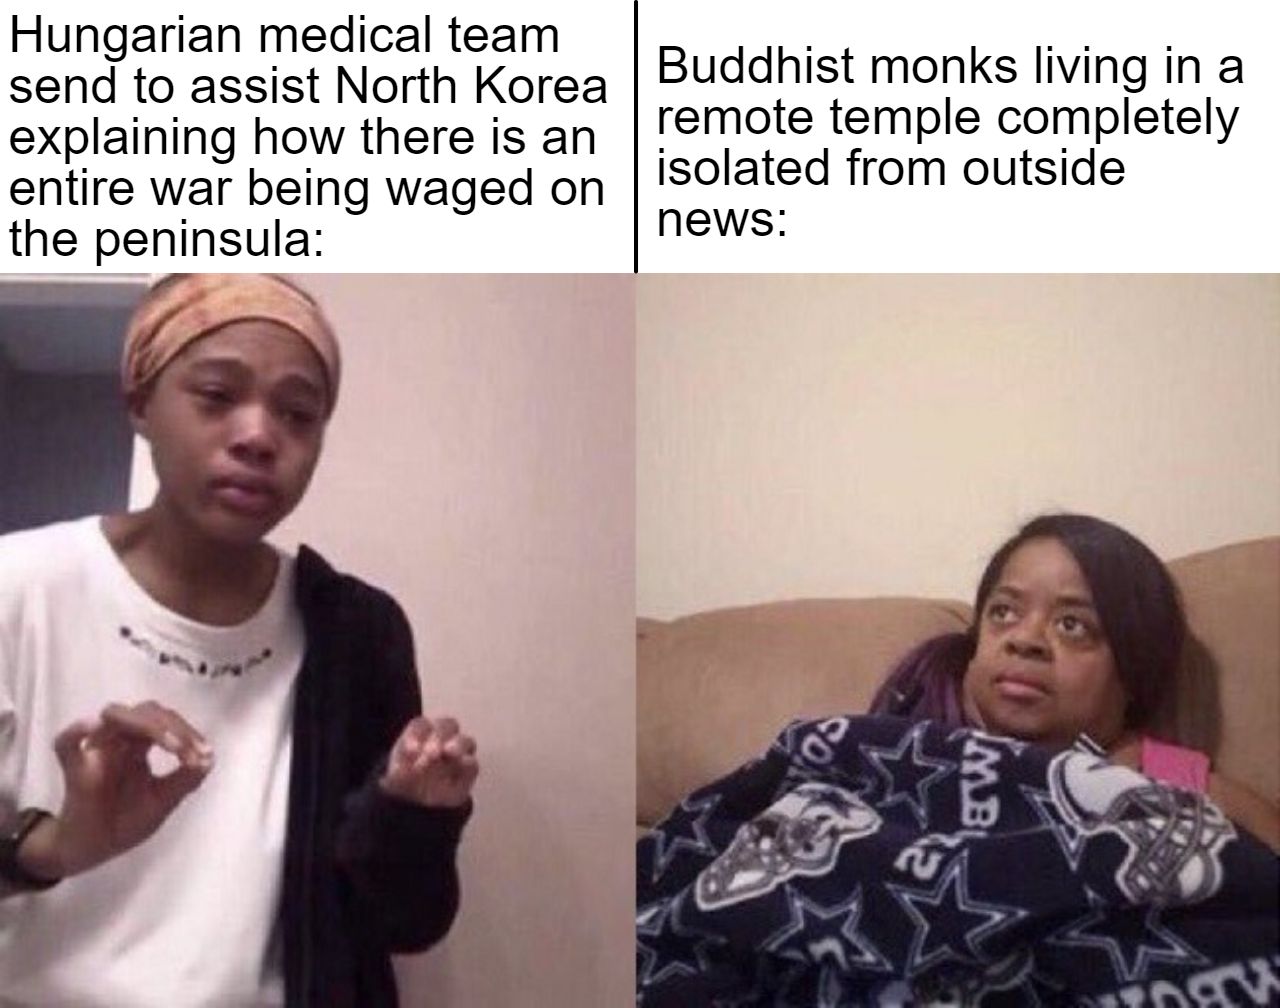 "This is why I don't go outside" - Buddhist monk, sort of